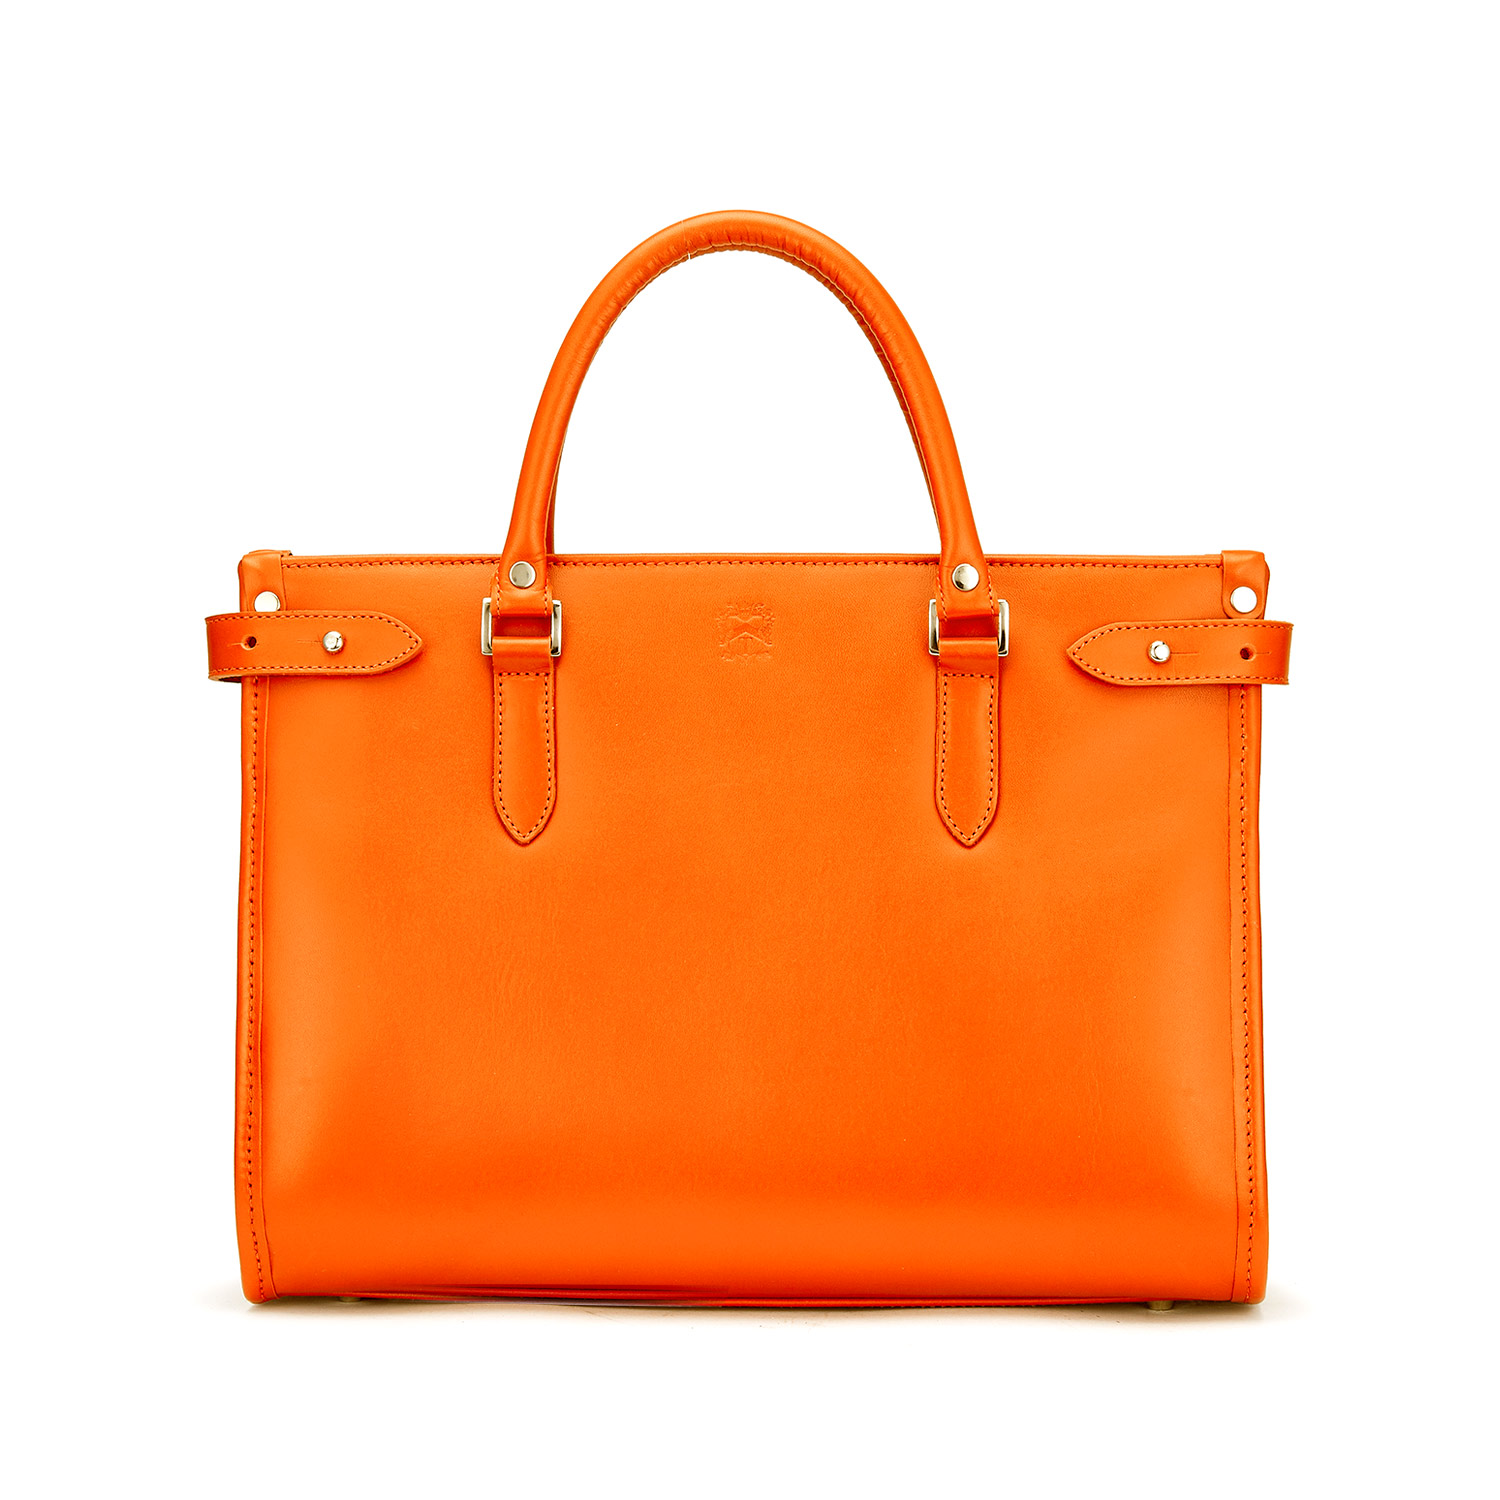 Kimbolton Luxury Leather Tote Work Bag Made in England | Tusting